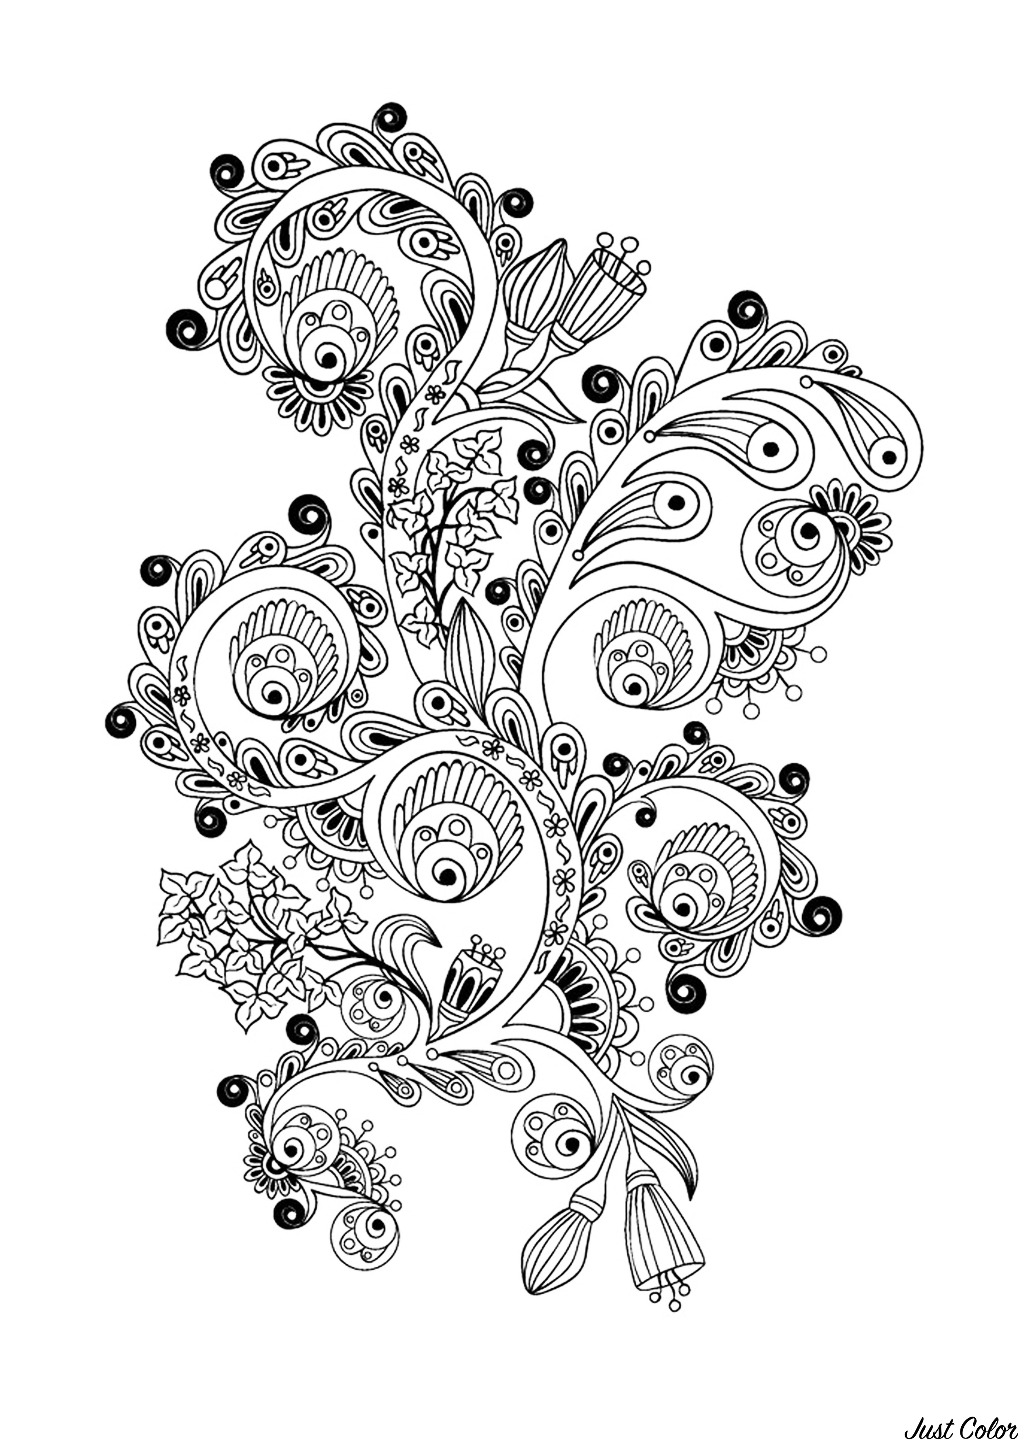 Zen & Anti-stress Coloring page : Abstract pattern inspired by flowers : n°8